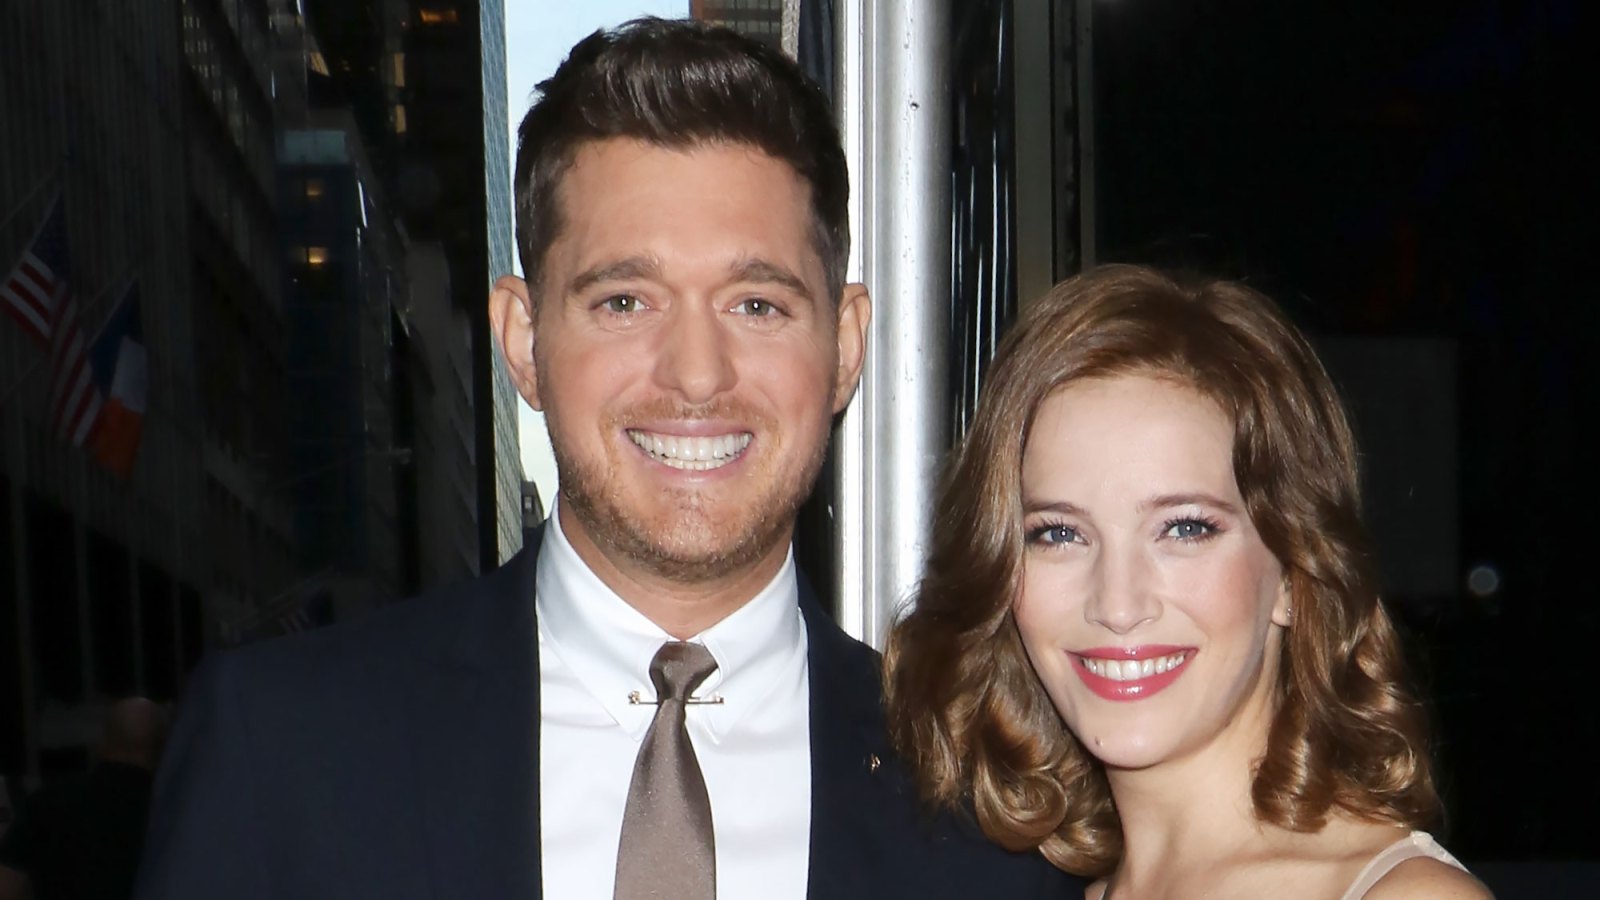 Michael Buble Showers Wife Luisana Lopilato With Compliments After Elbowing Video